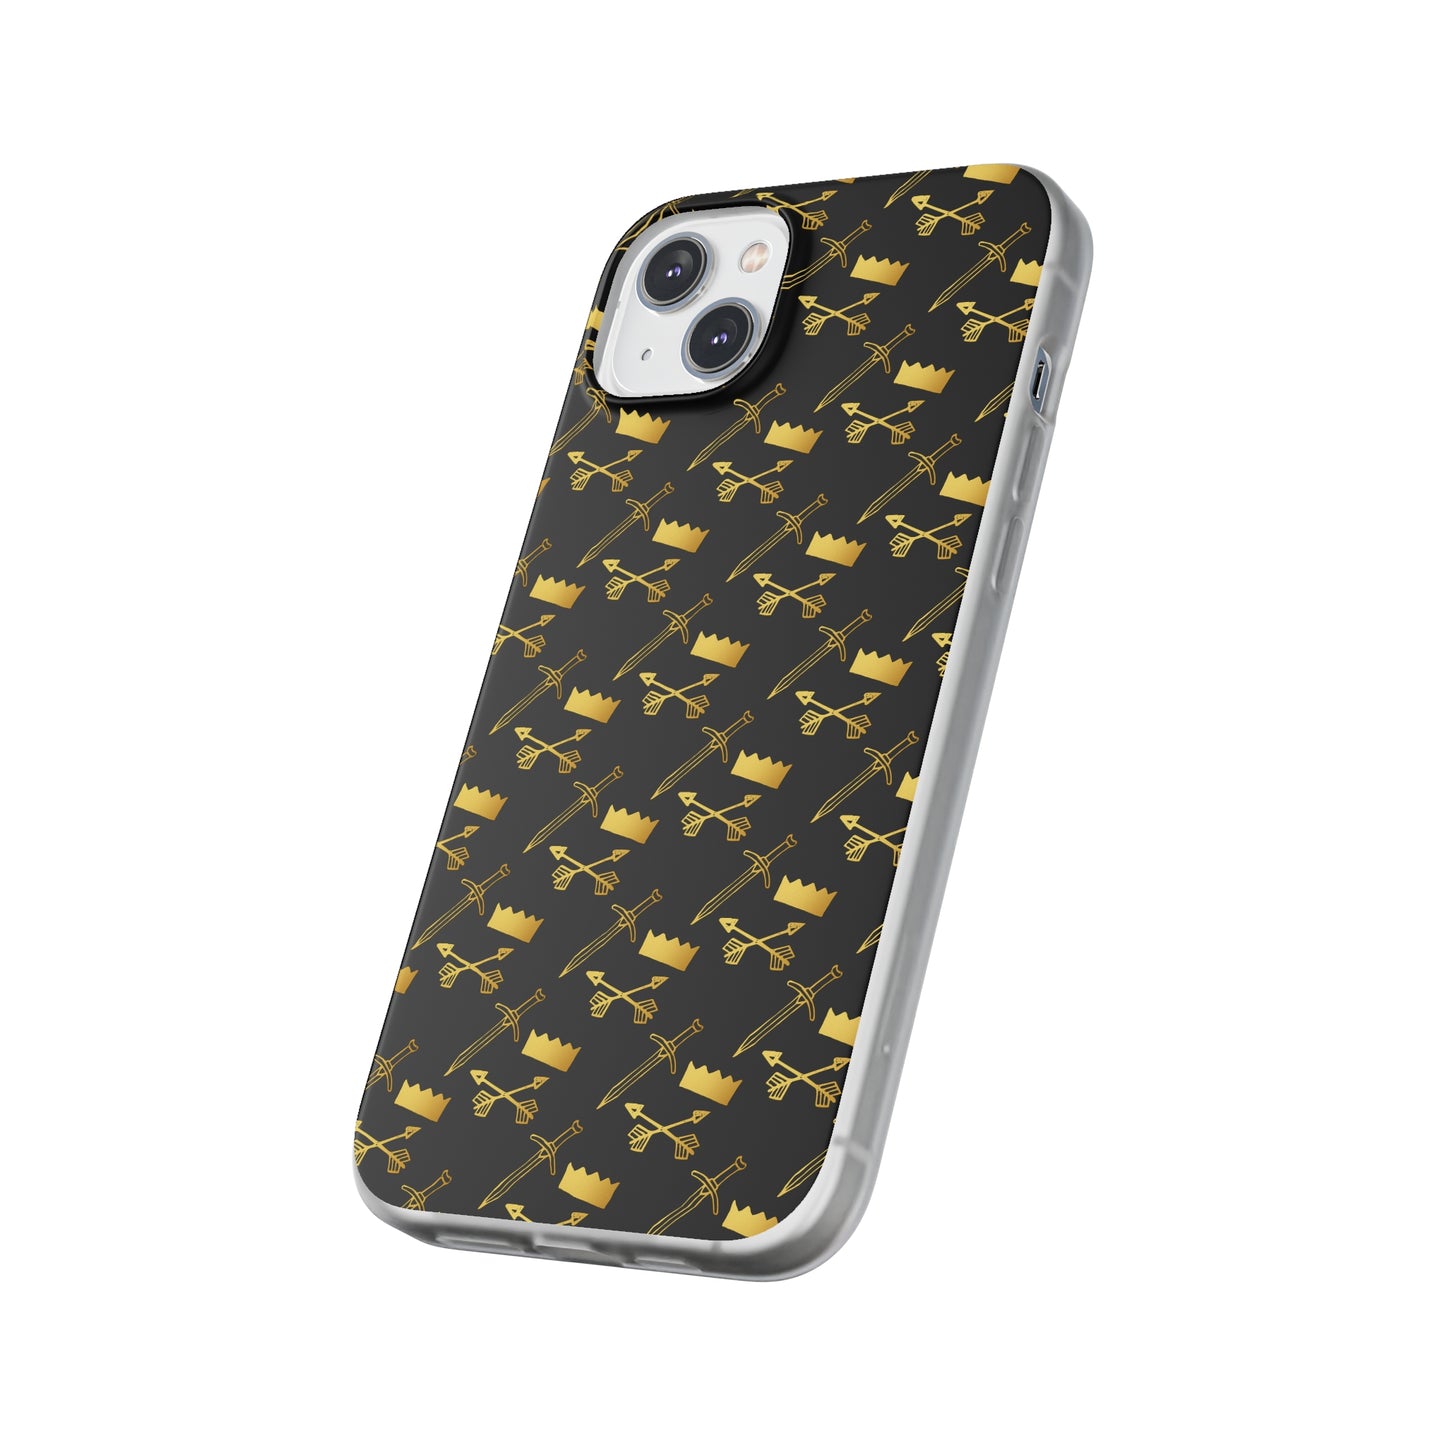 Gold and Bold Warrior - Flexi Phone Cases